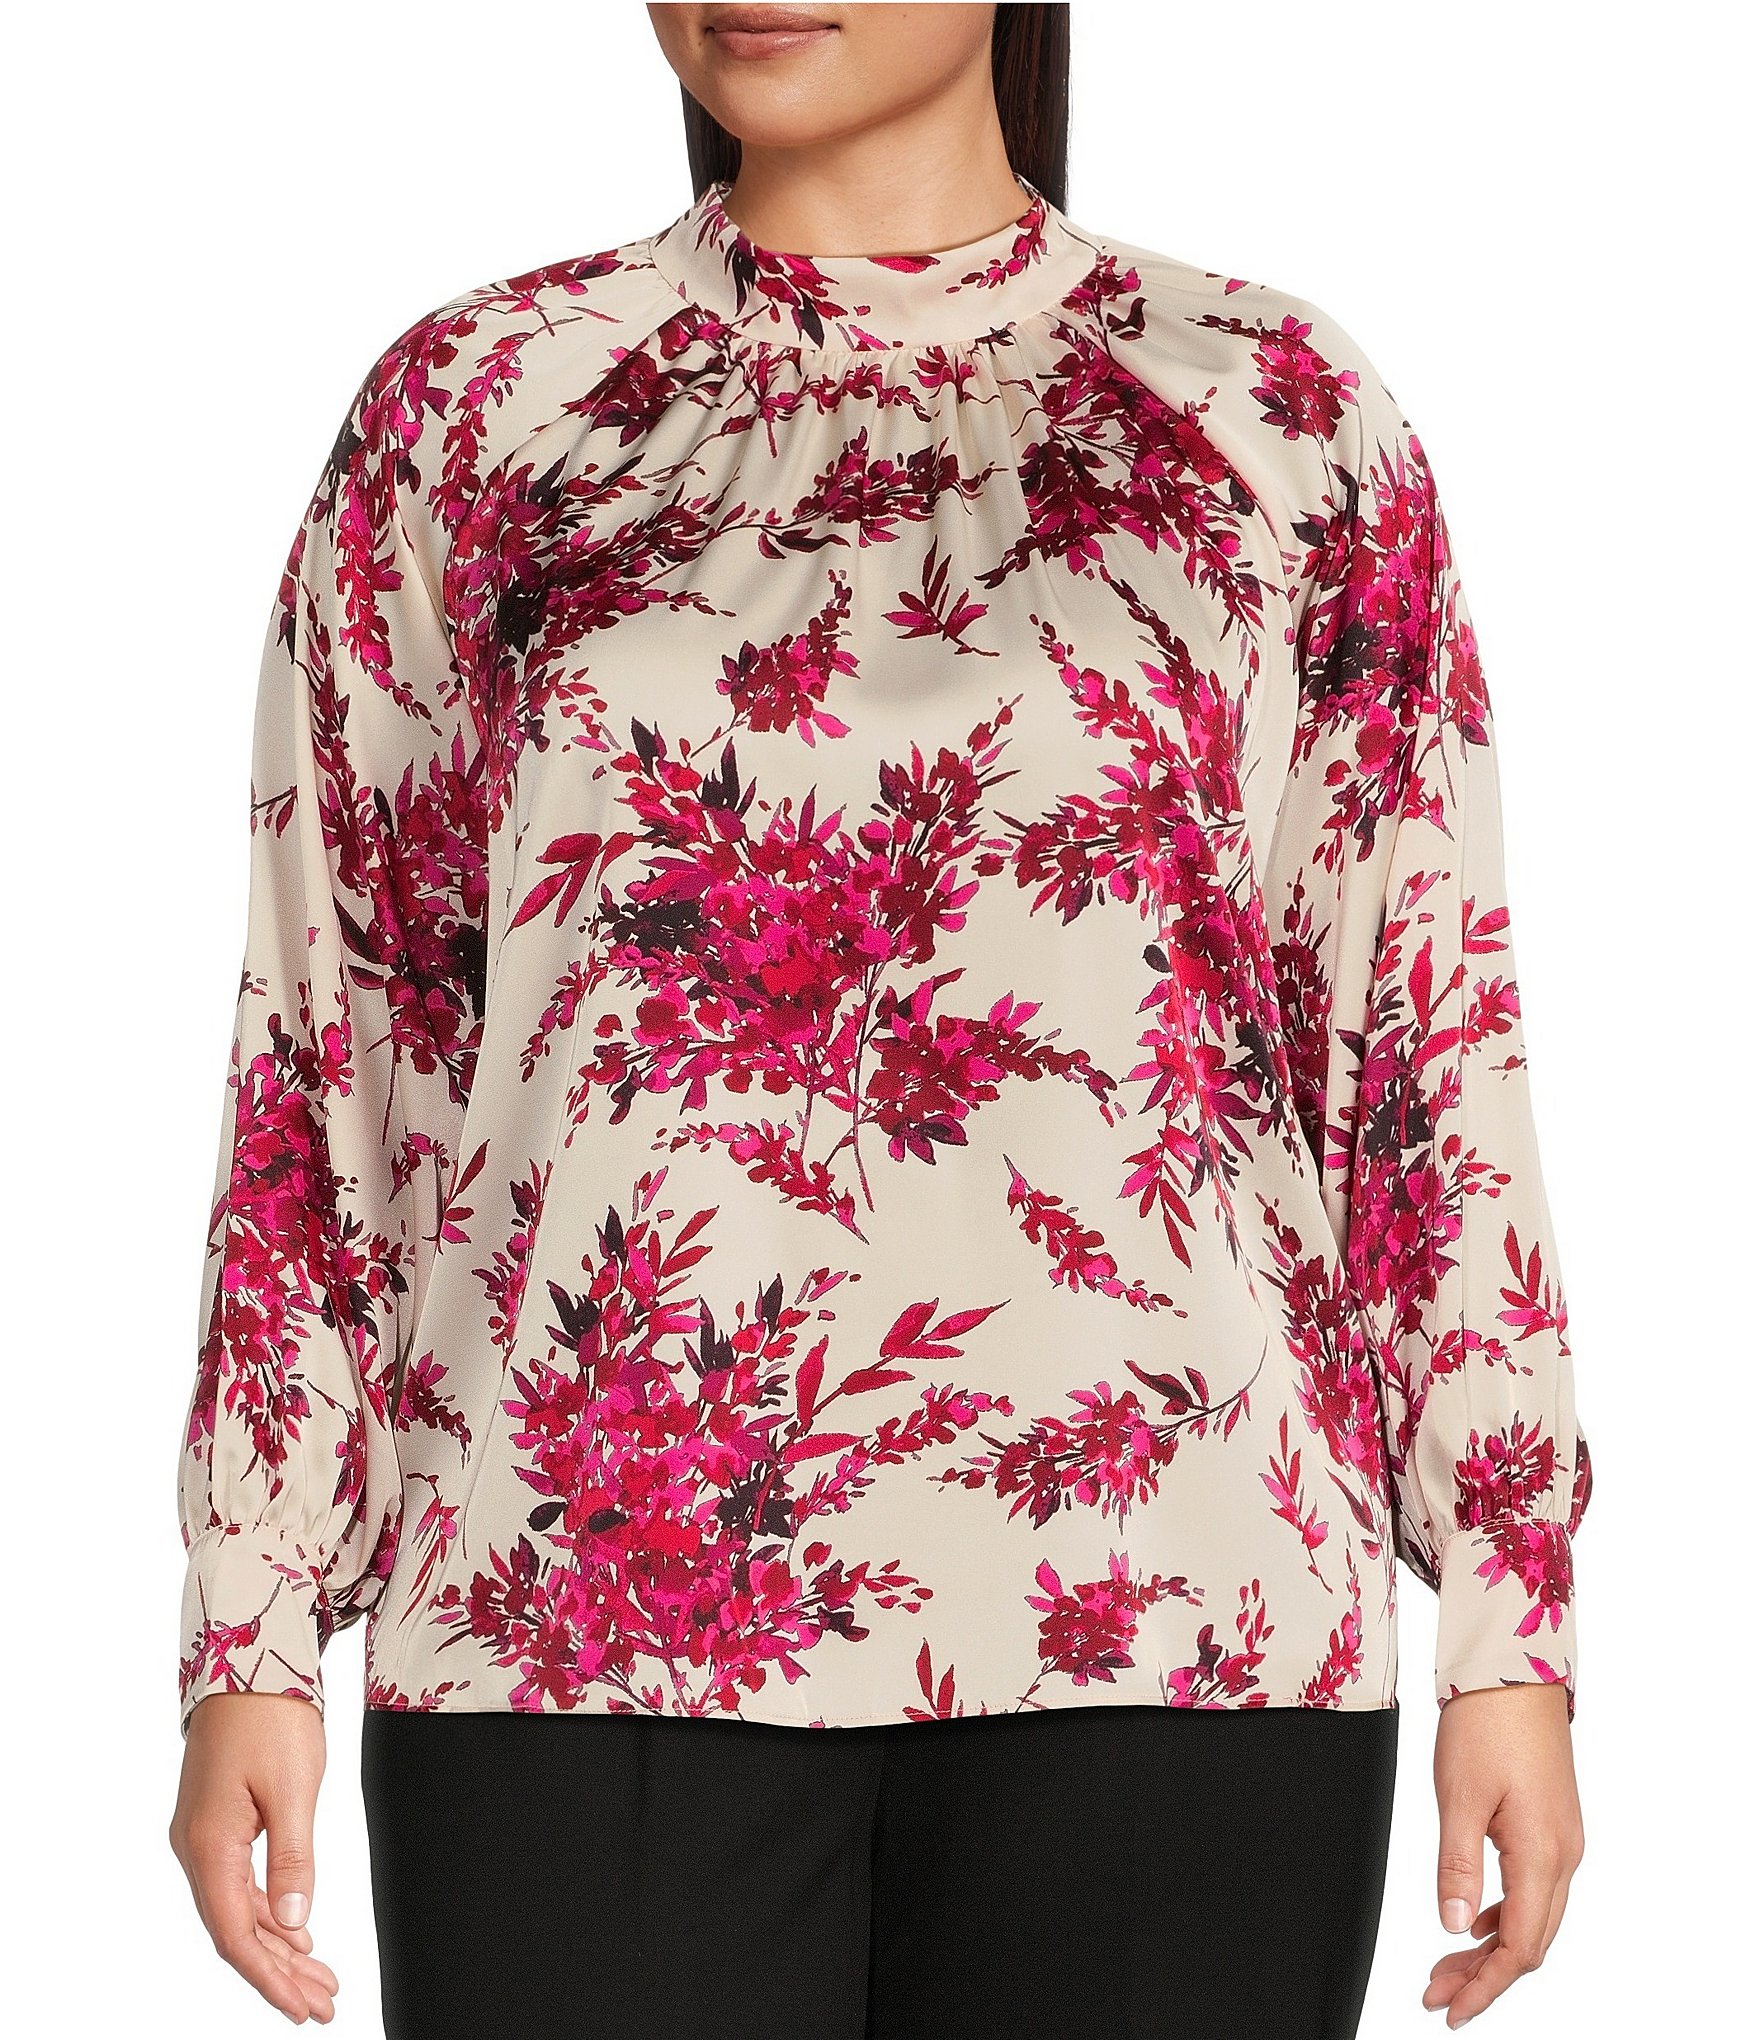 Pink Women's Plus-Size Tops & Blouses